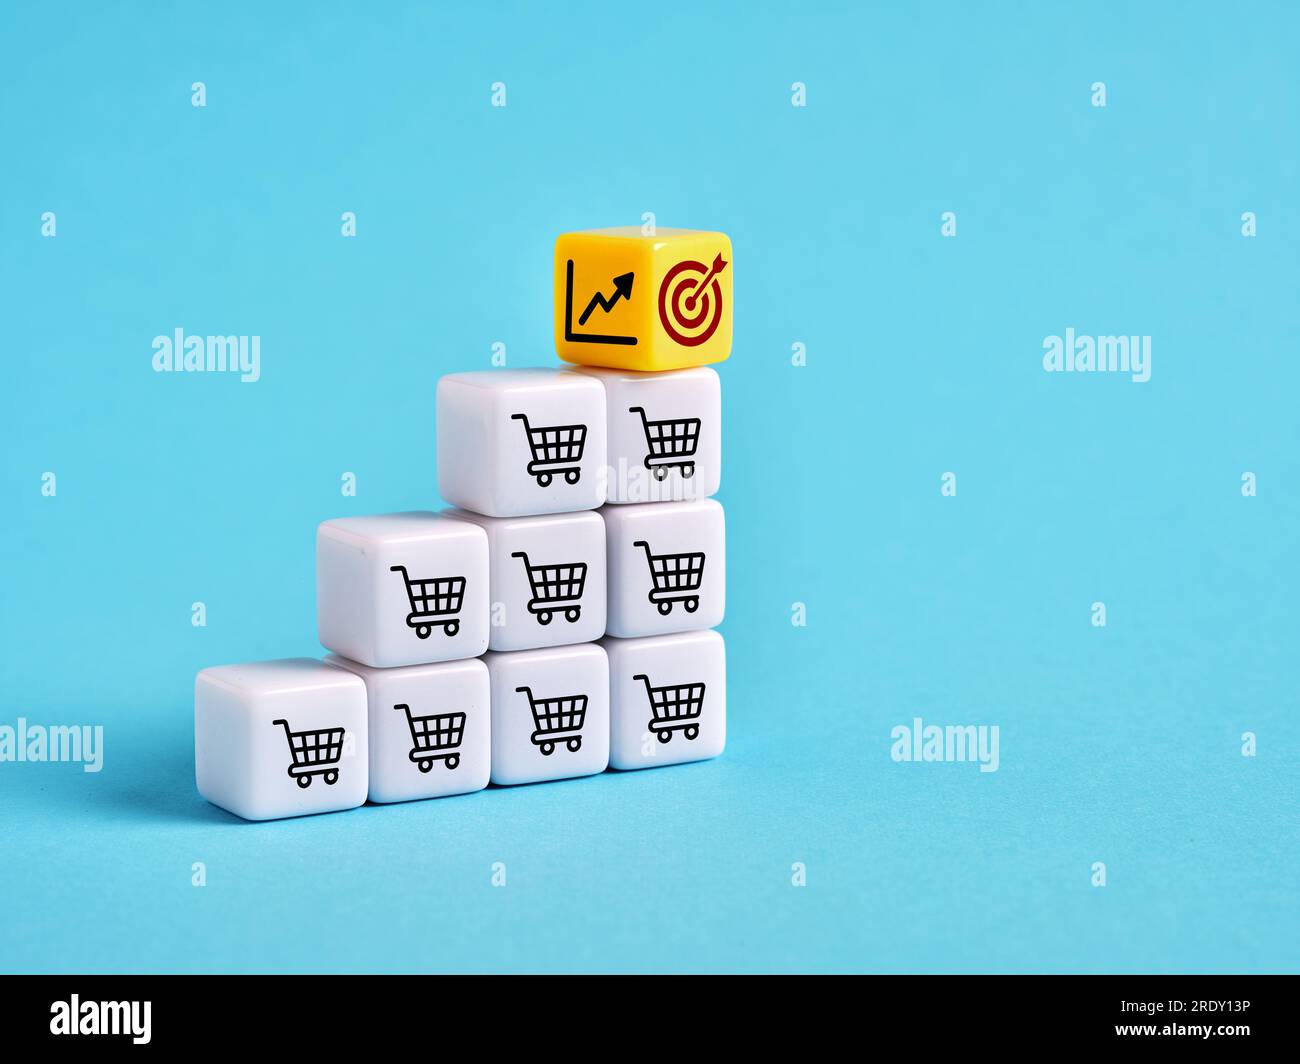 Achieving the sales goals and business growth. Setting the sales target objectives. Shopping cart, target and ascending graph symbols on cubes. Stock Photo